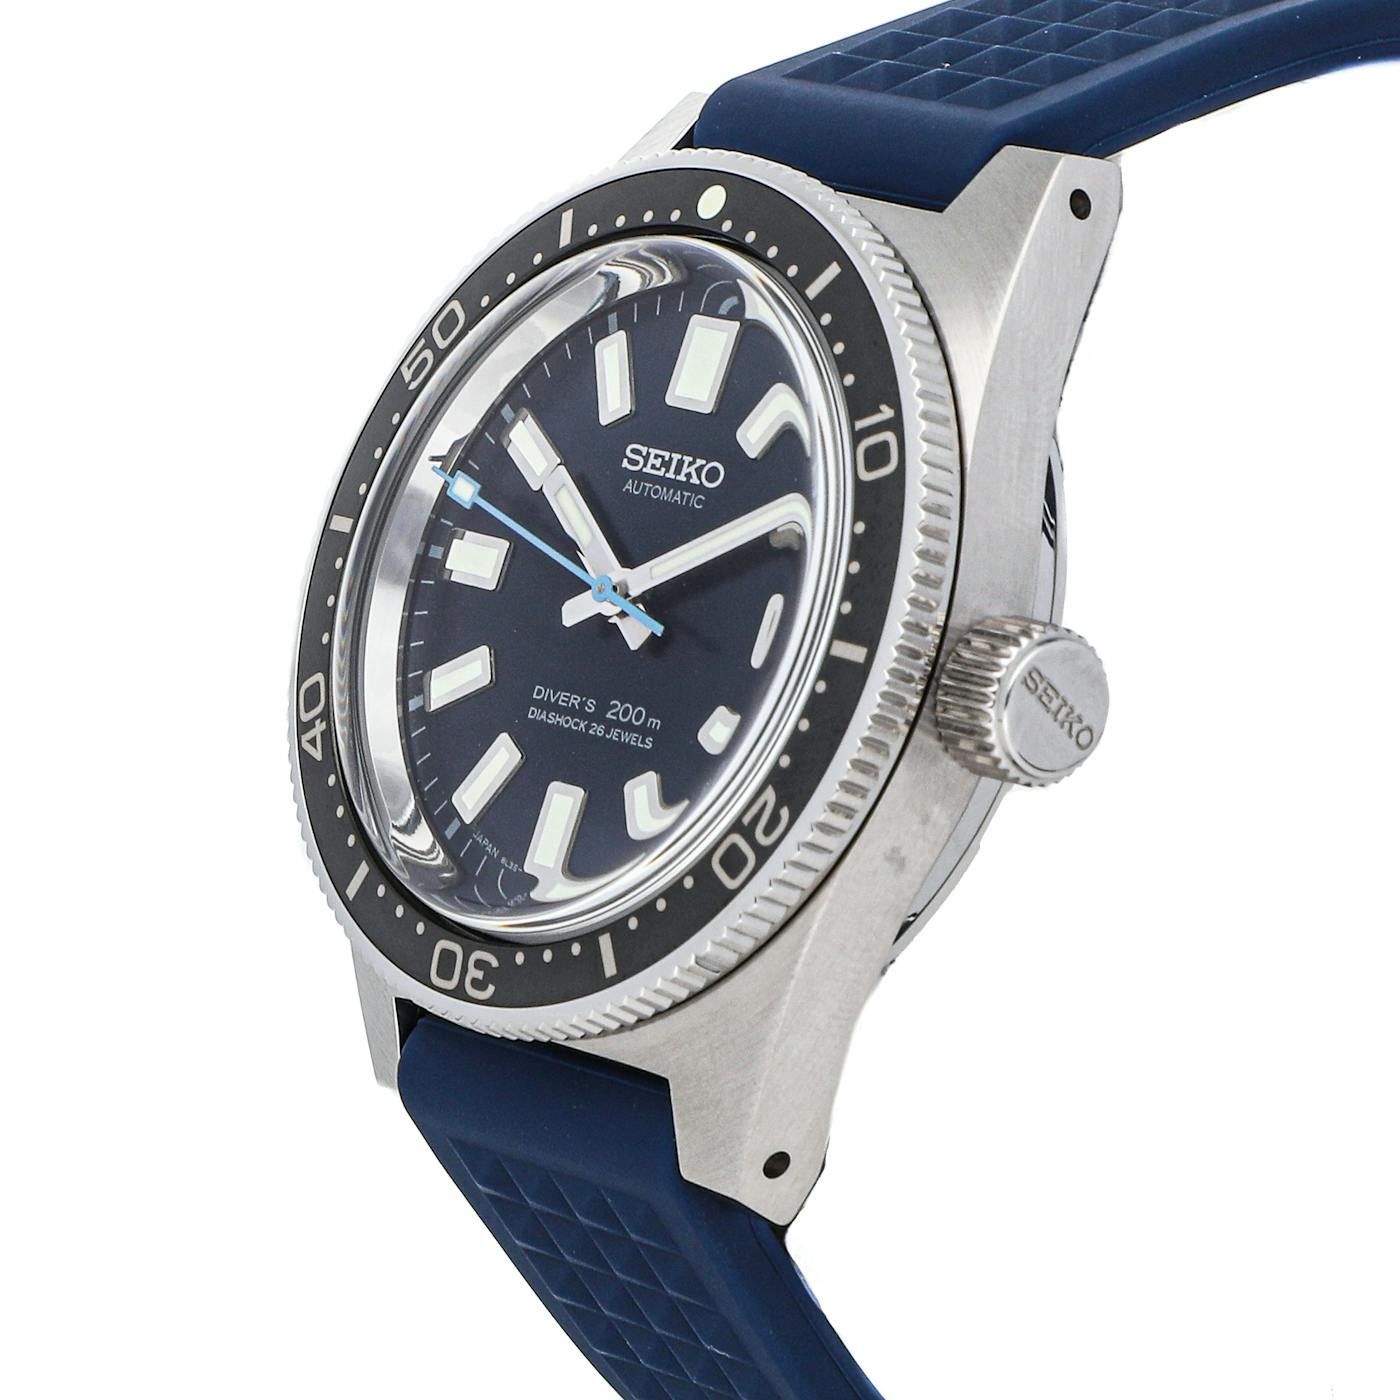 Pre-Owned Seiko Prospex Diver's 55th Anniversary Limited Edition SBDX039 |  WatchBox